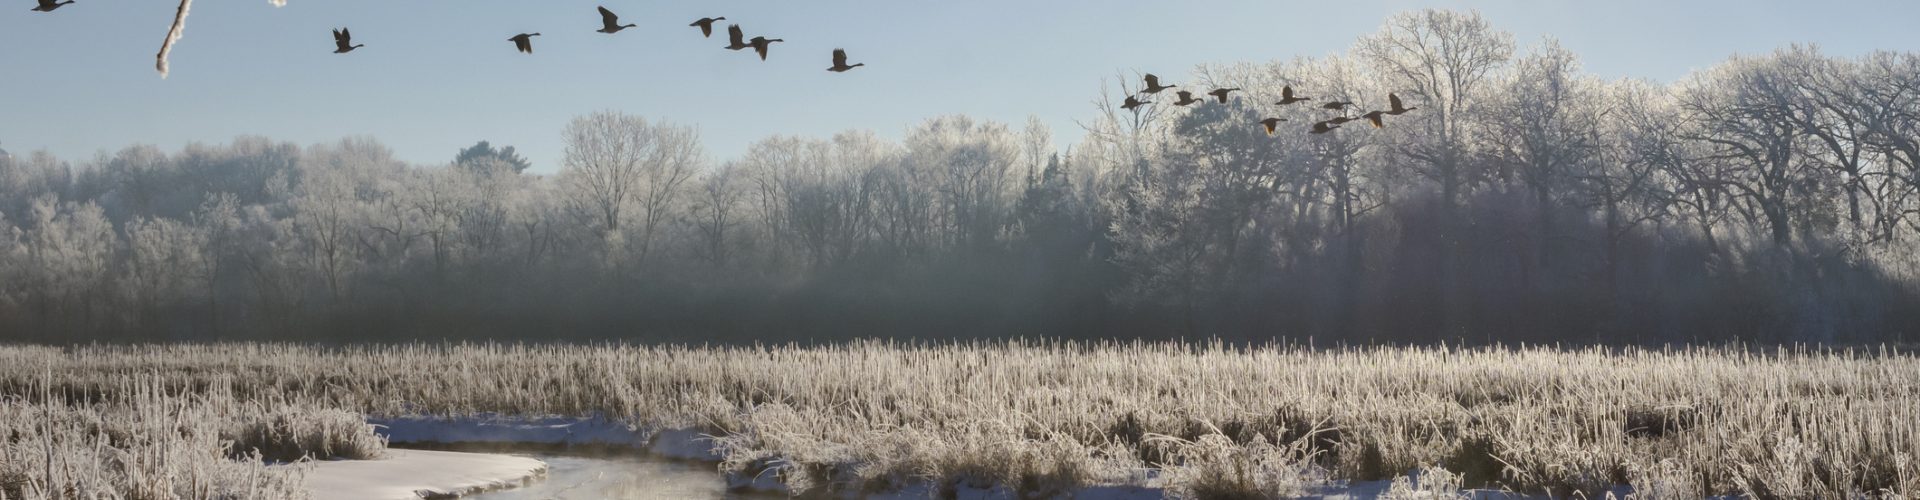 Geese fly over the Bark River in Waukesha County Wisconsin on a clear cold winter's morning. Hoar frost covers the river bottom.